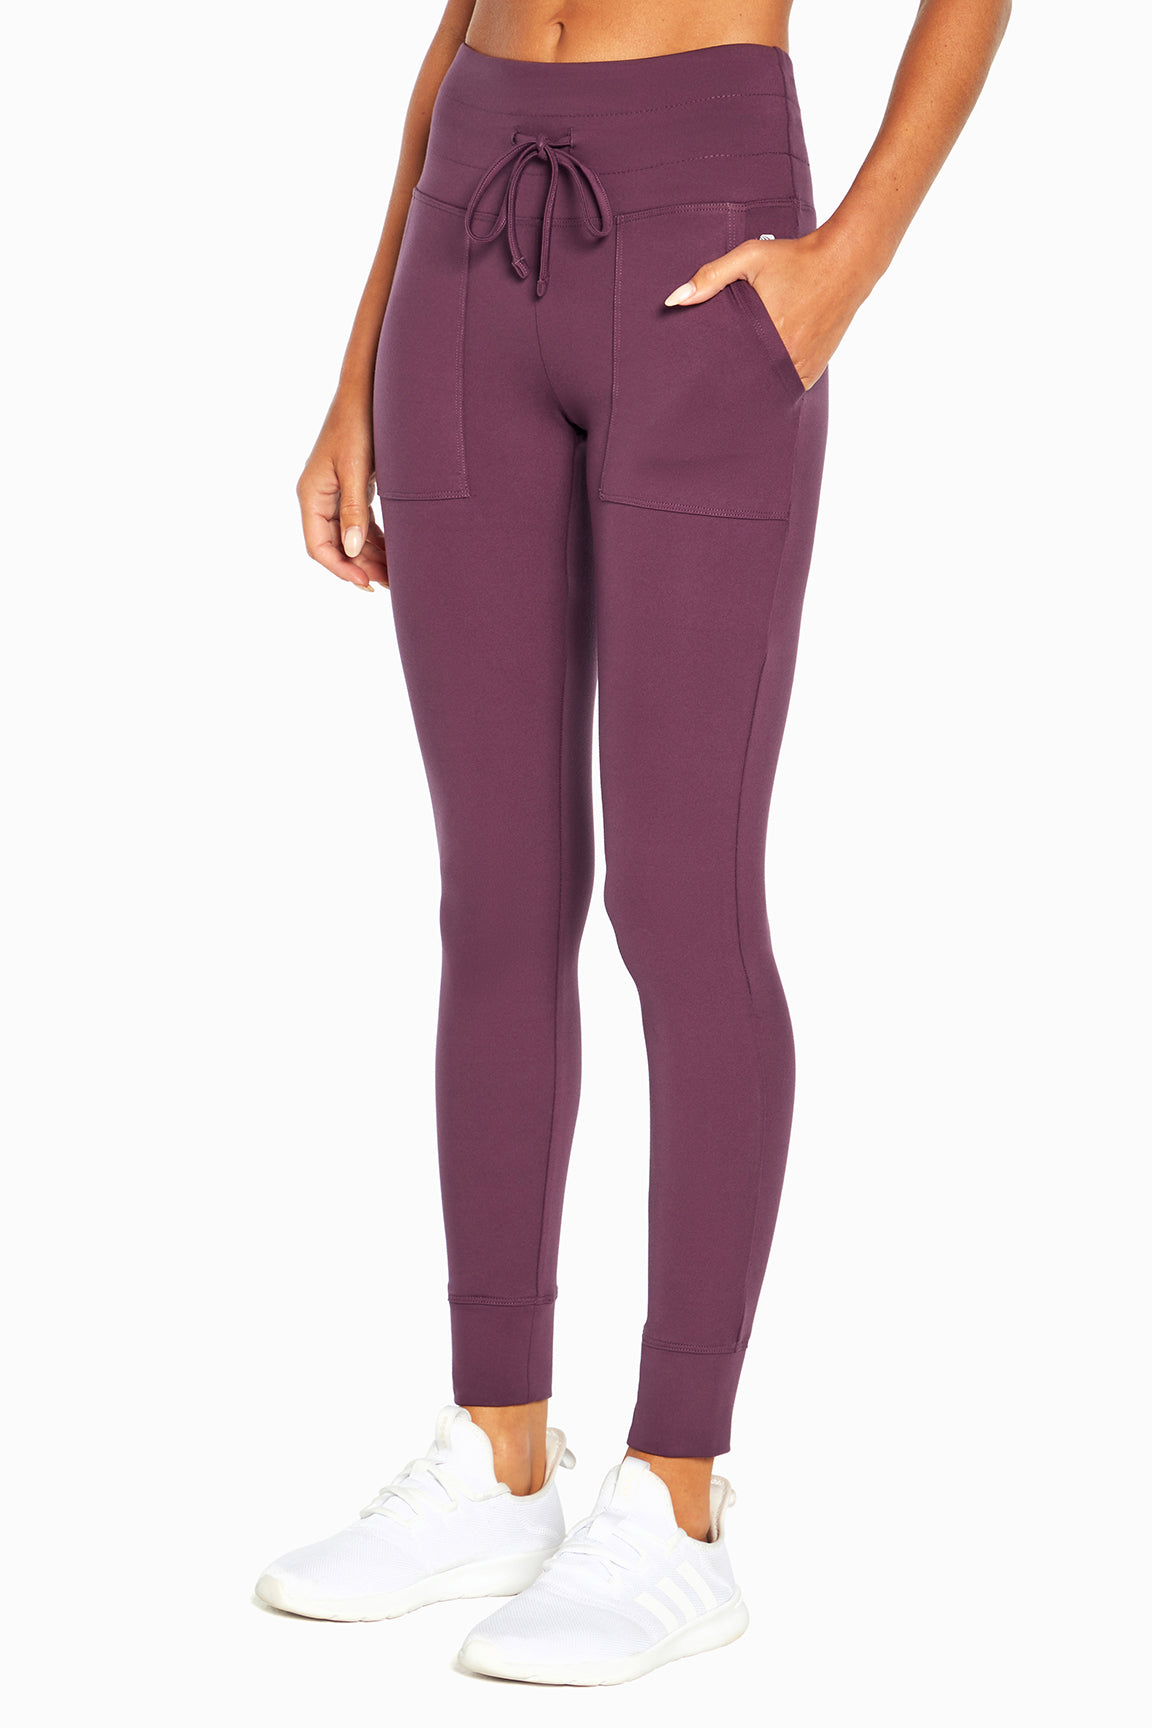 🥰 @marika_clothing's leggings are at @costco! These leggings are my  FAVORITE! The soft double side peached active fabric & comfort w